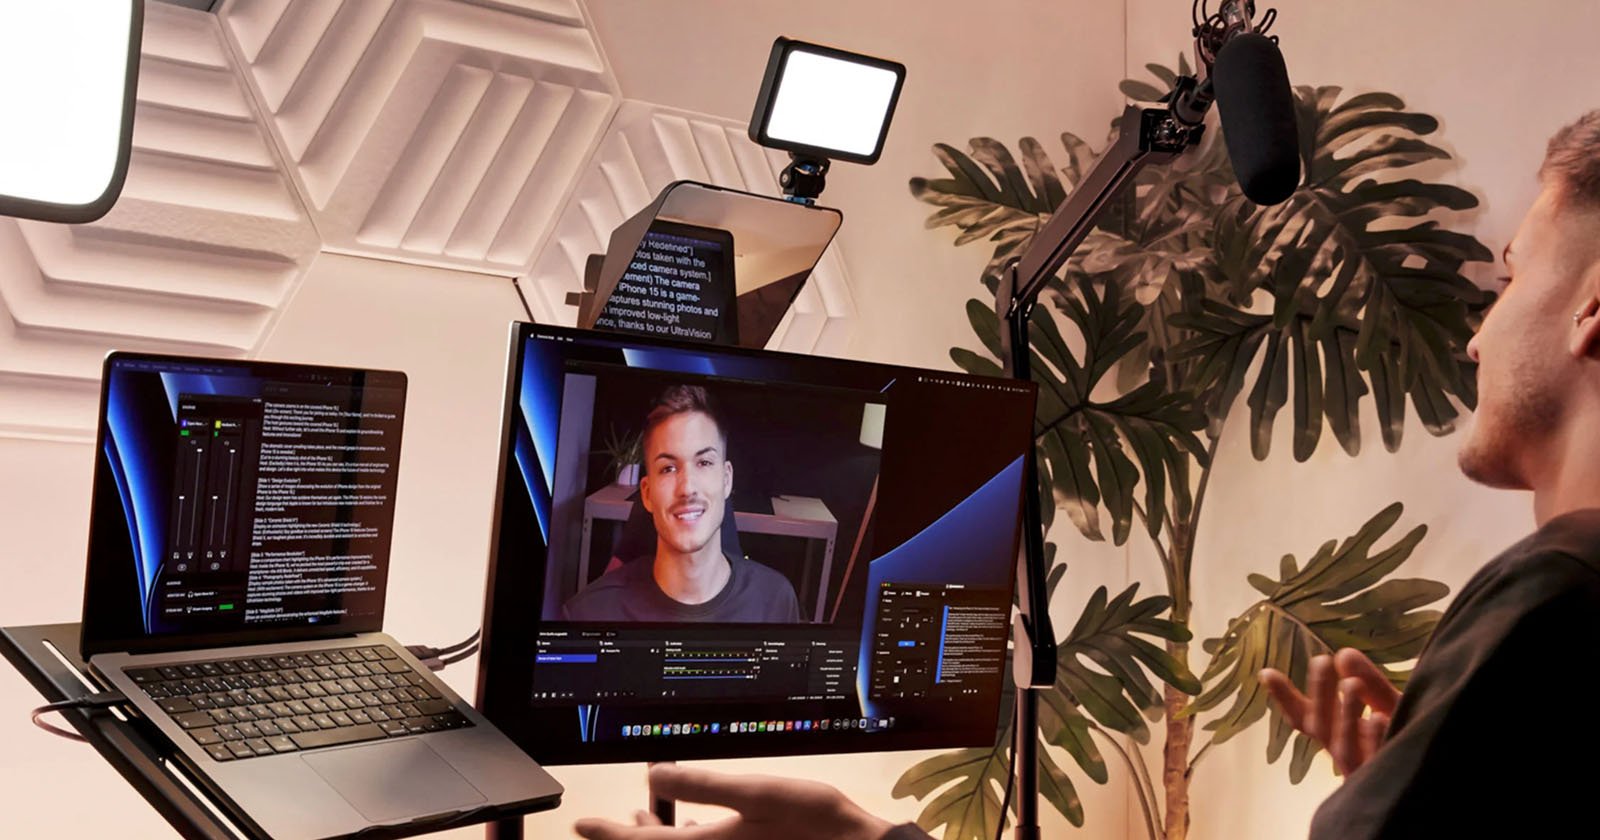  elgato teleprompter all-in-one plug-and-play device 